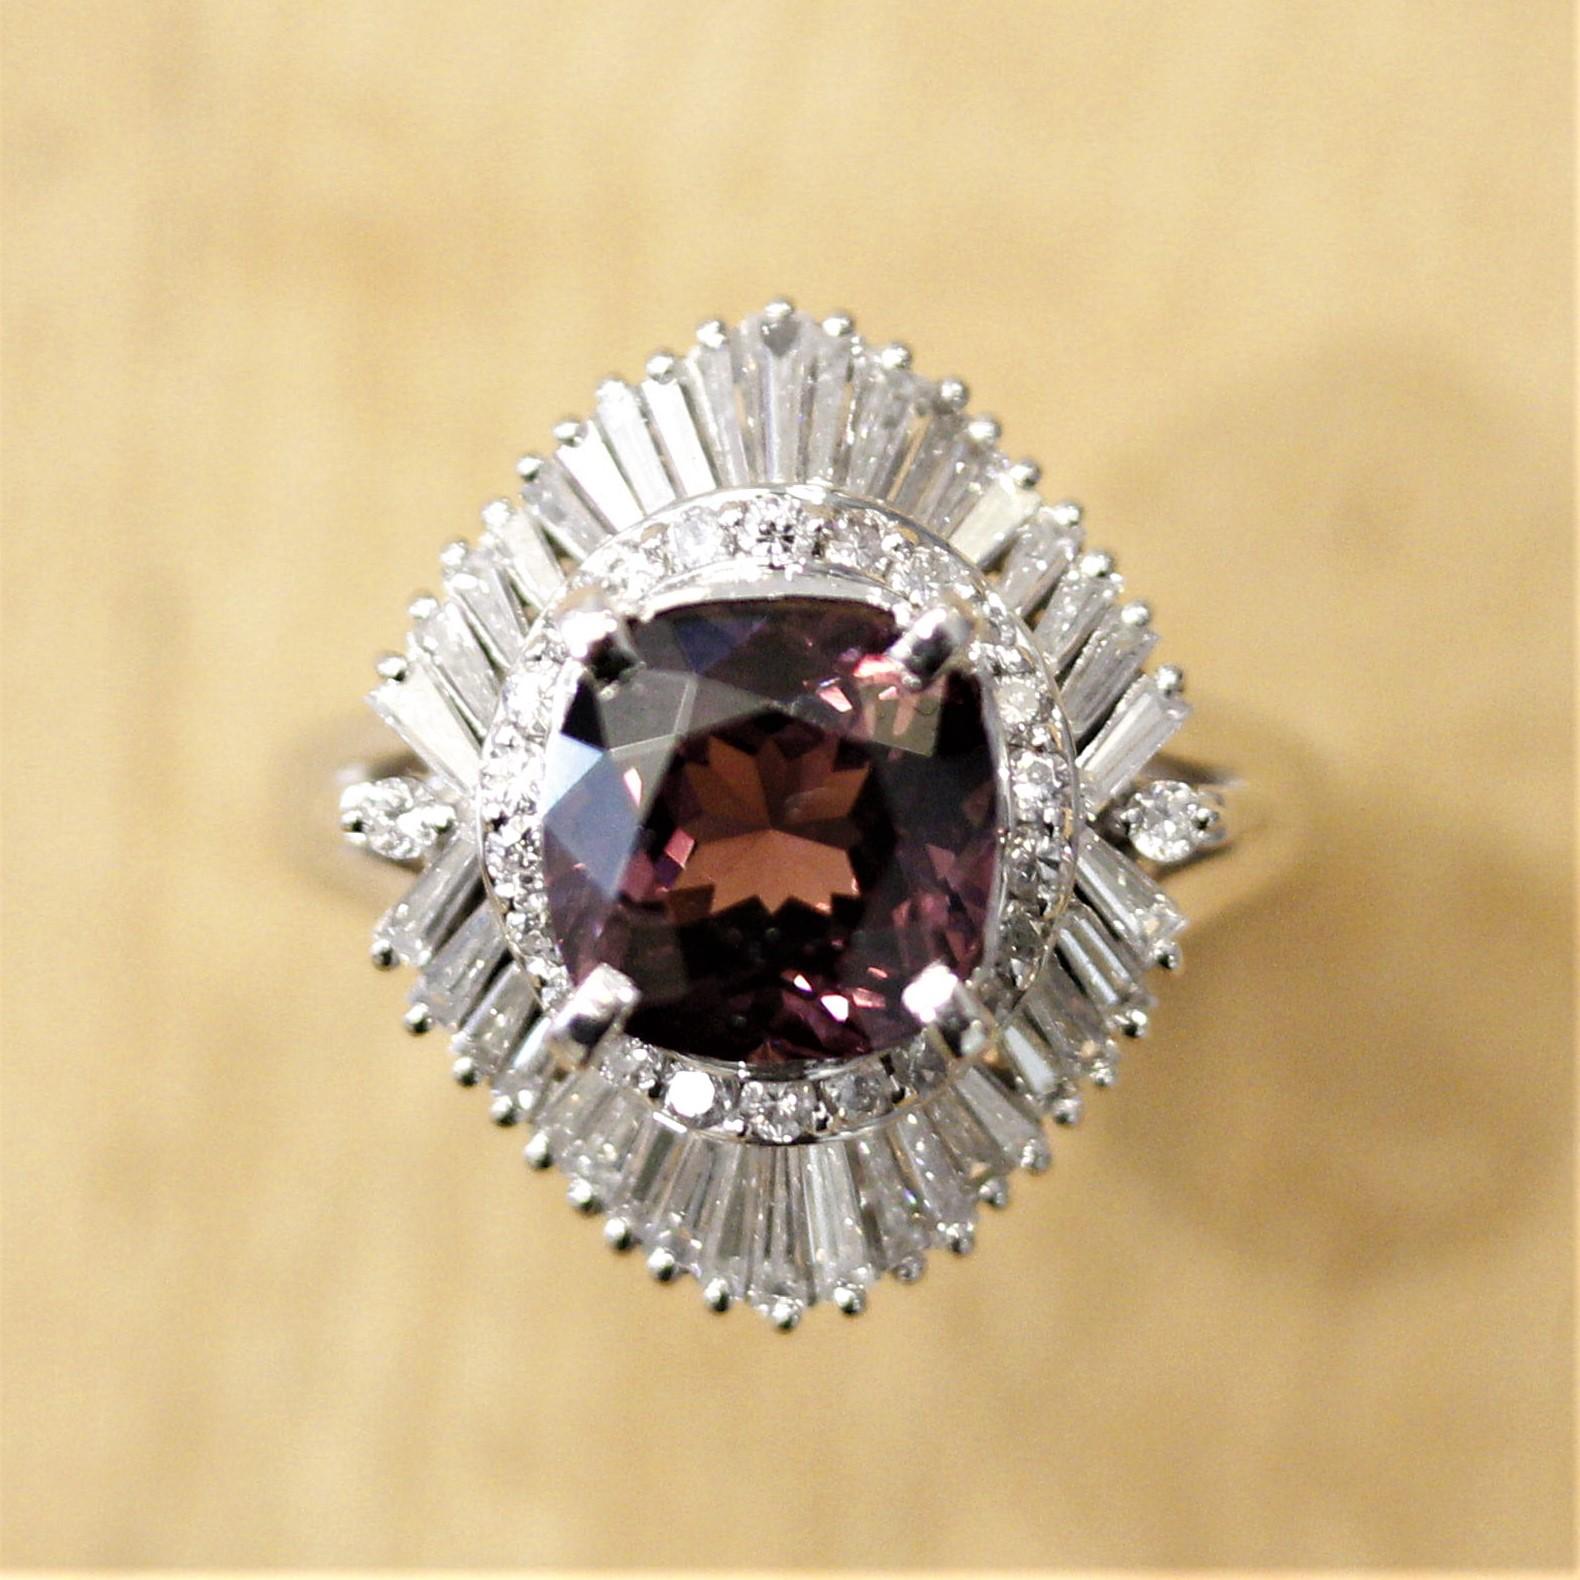 A chic ring featuring a gem 3.42 carat spinel with a unique pinkish-violet color. Due to spinel’s high refractive index, the stone bright with excellent brilliance and scintillation. Adding to that this example is free of any eye-visible inclusions